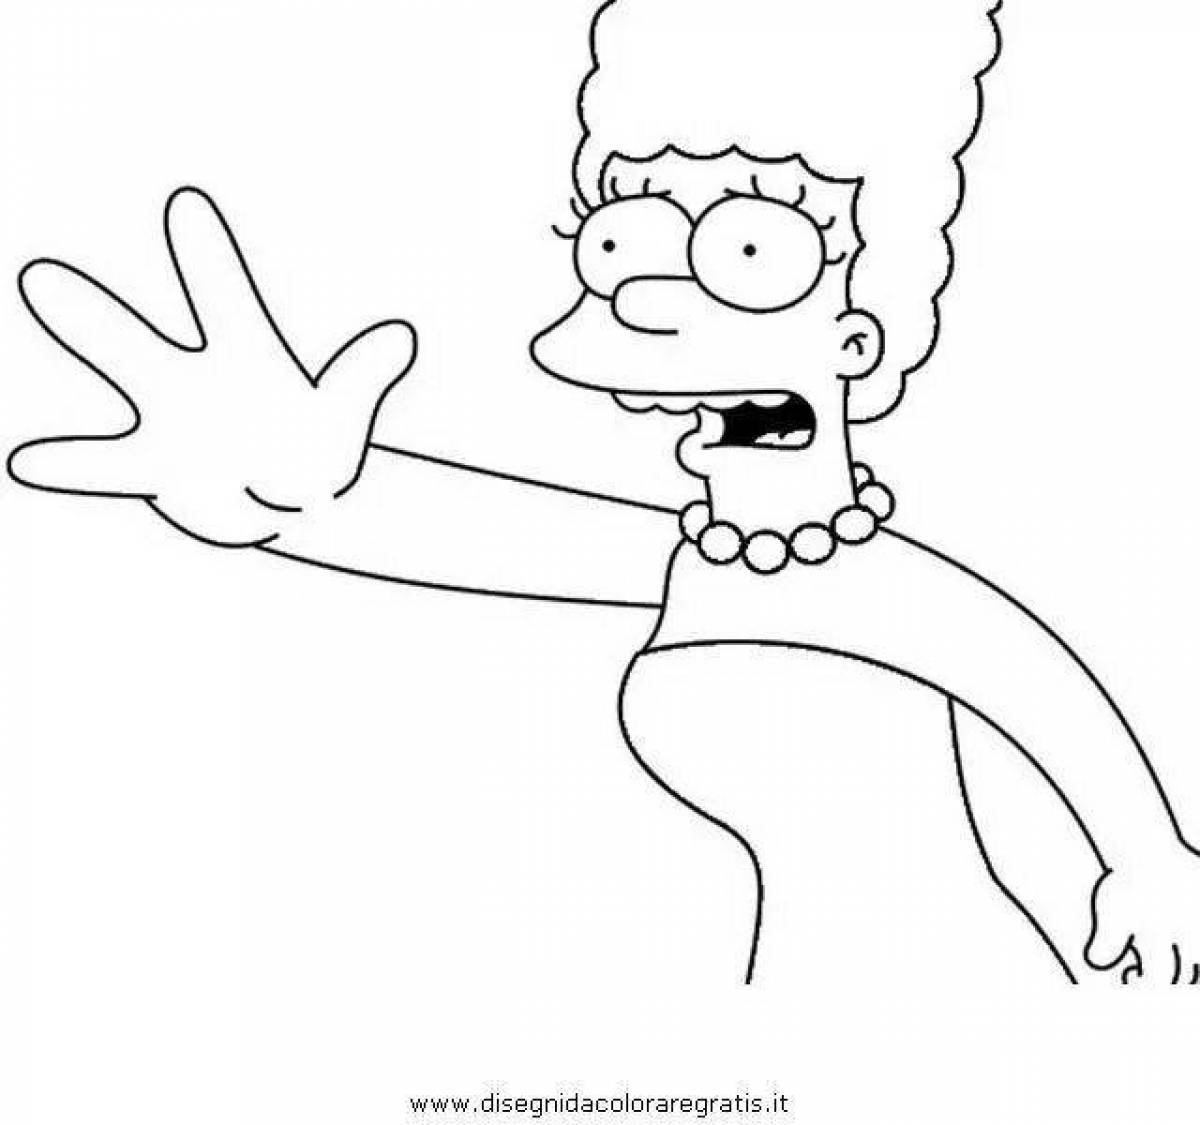 Charming marge simpson coloring book